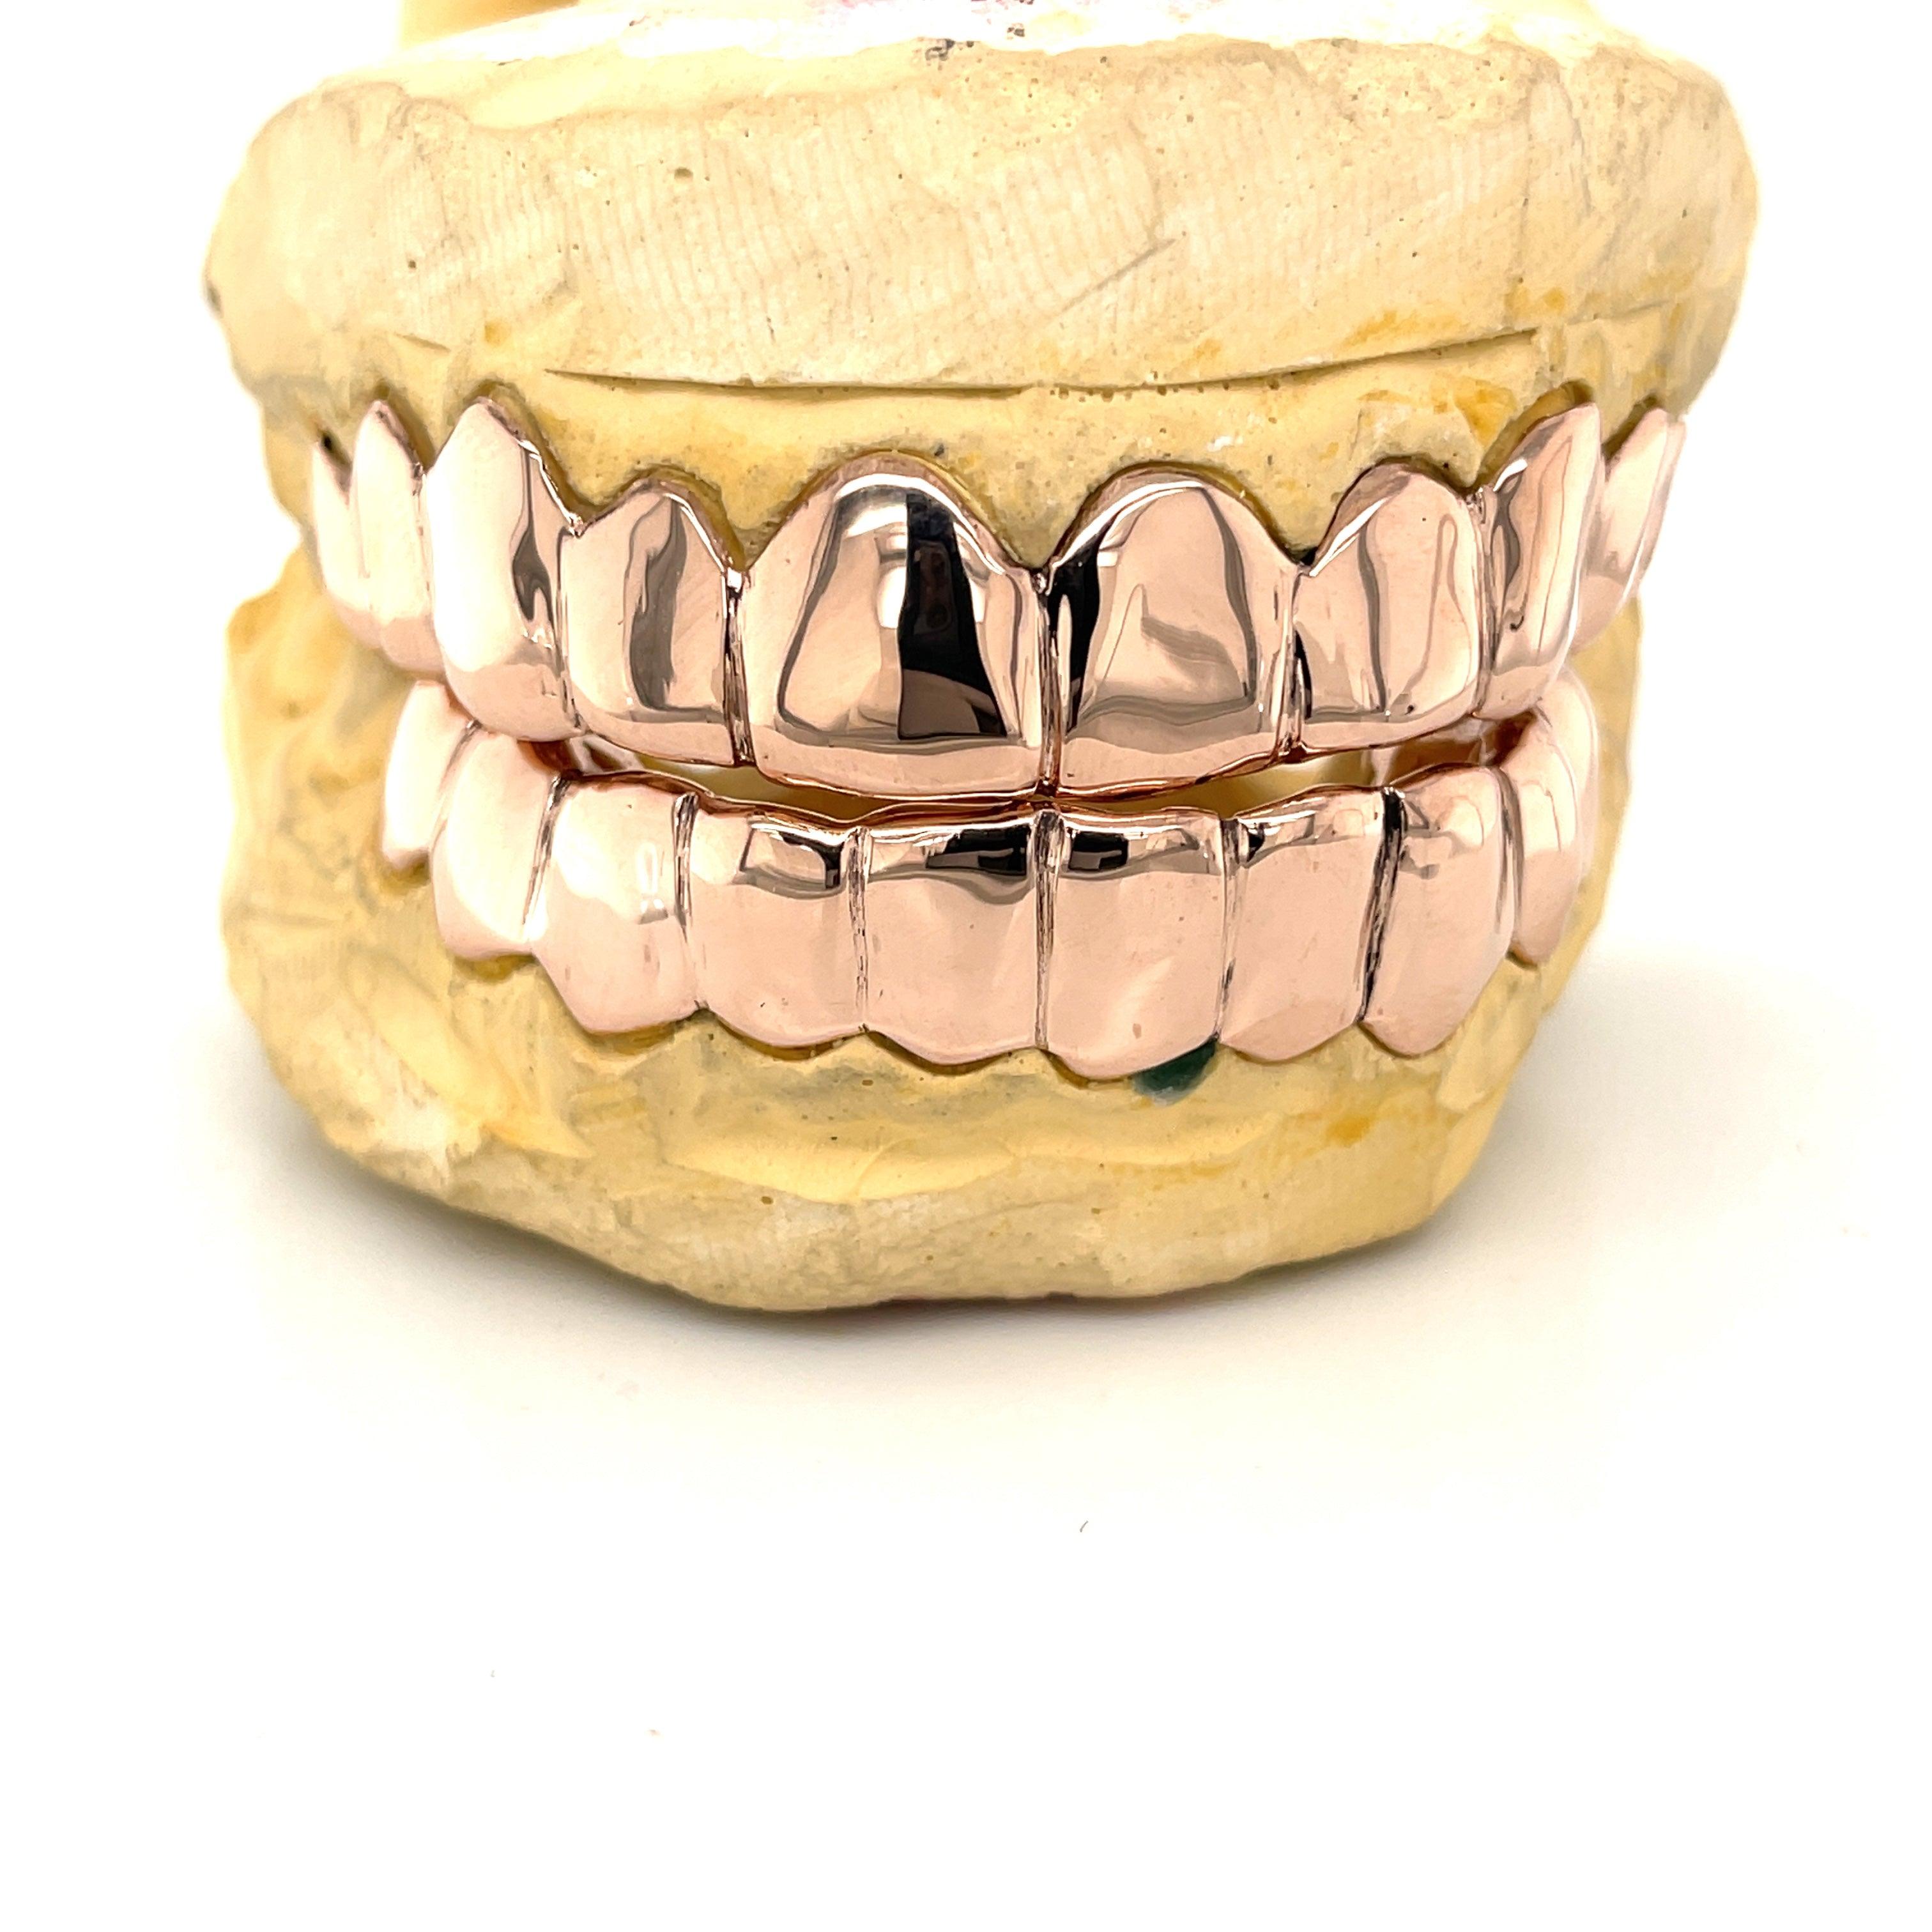 20pc High Polished Gold Grillz - Seattle Gold Grillz